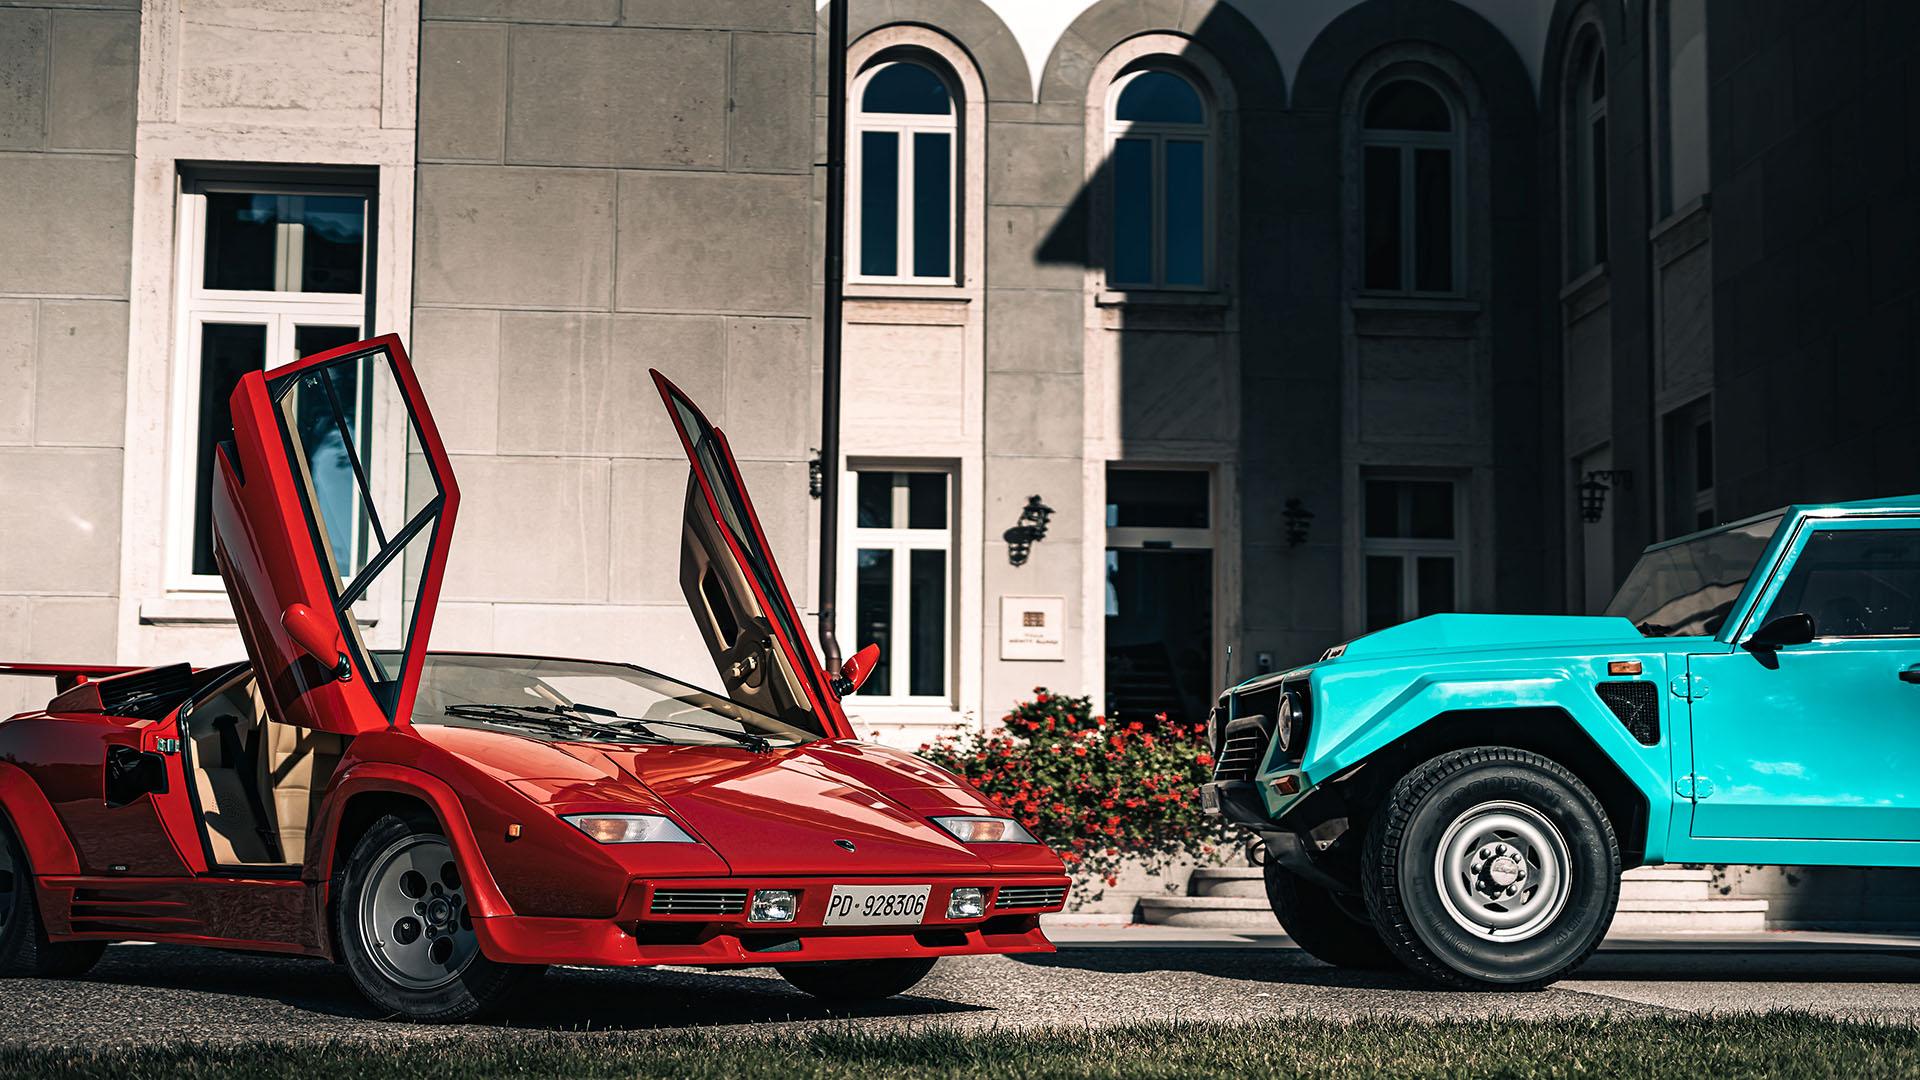 Countach and lm002 v12 4